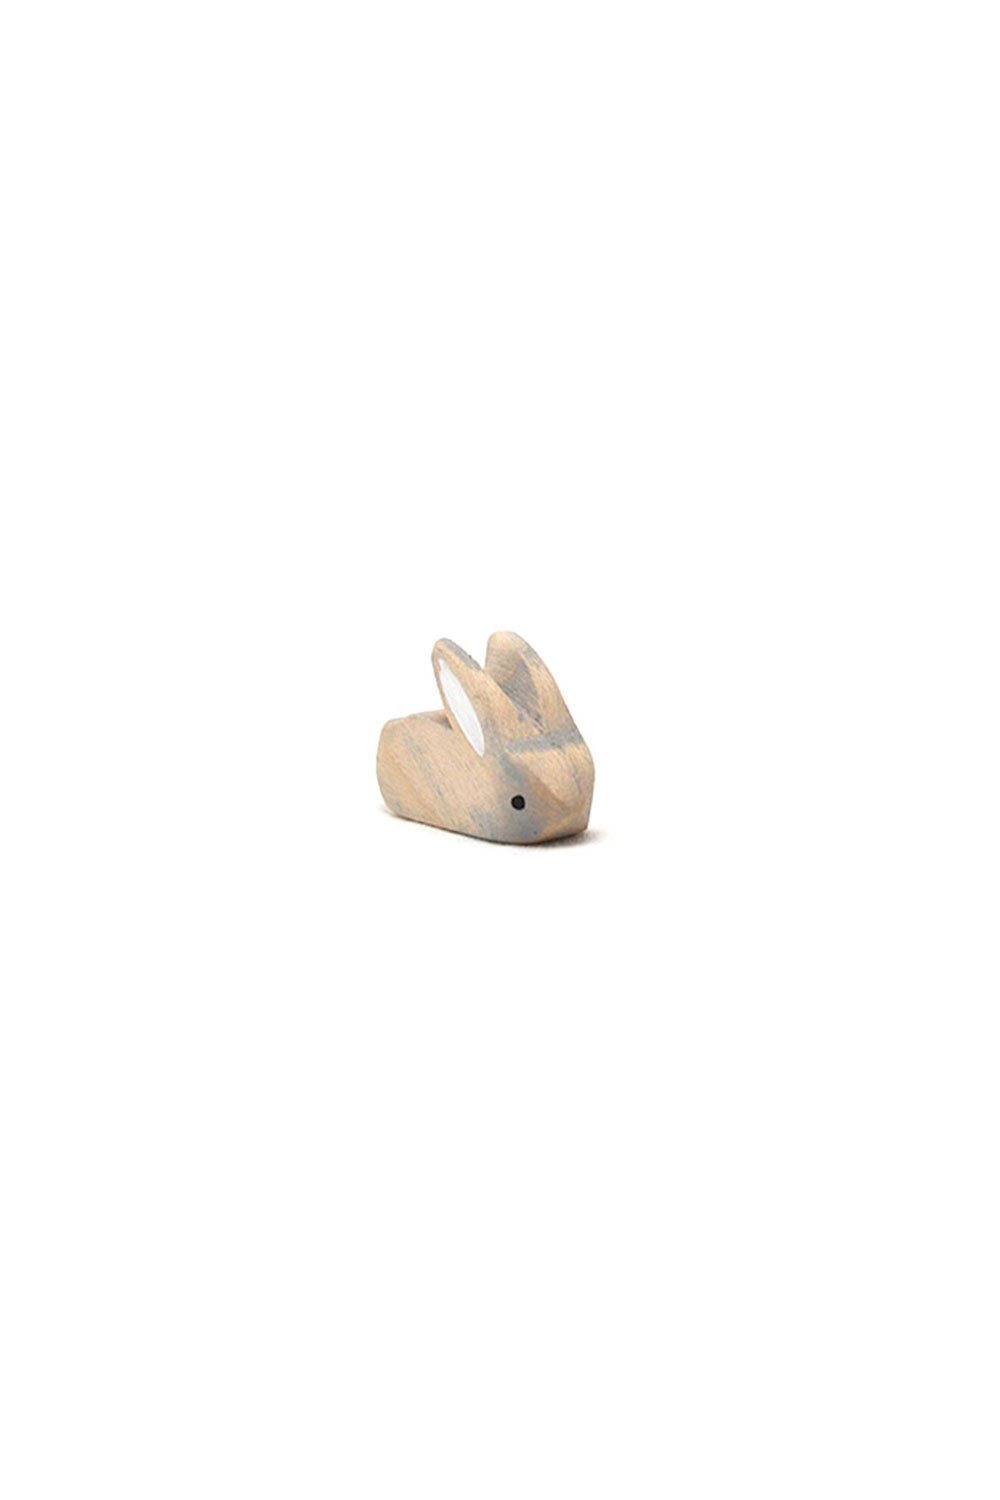 Brin d'Ours Handmade Wooden Baby Rabbits - Wood Wood Toys Canada's Favourite Montessori Toy Store